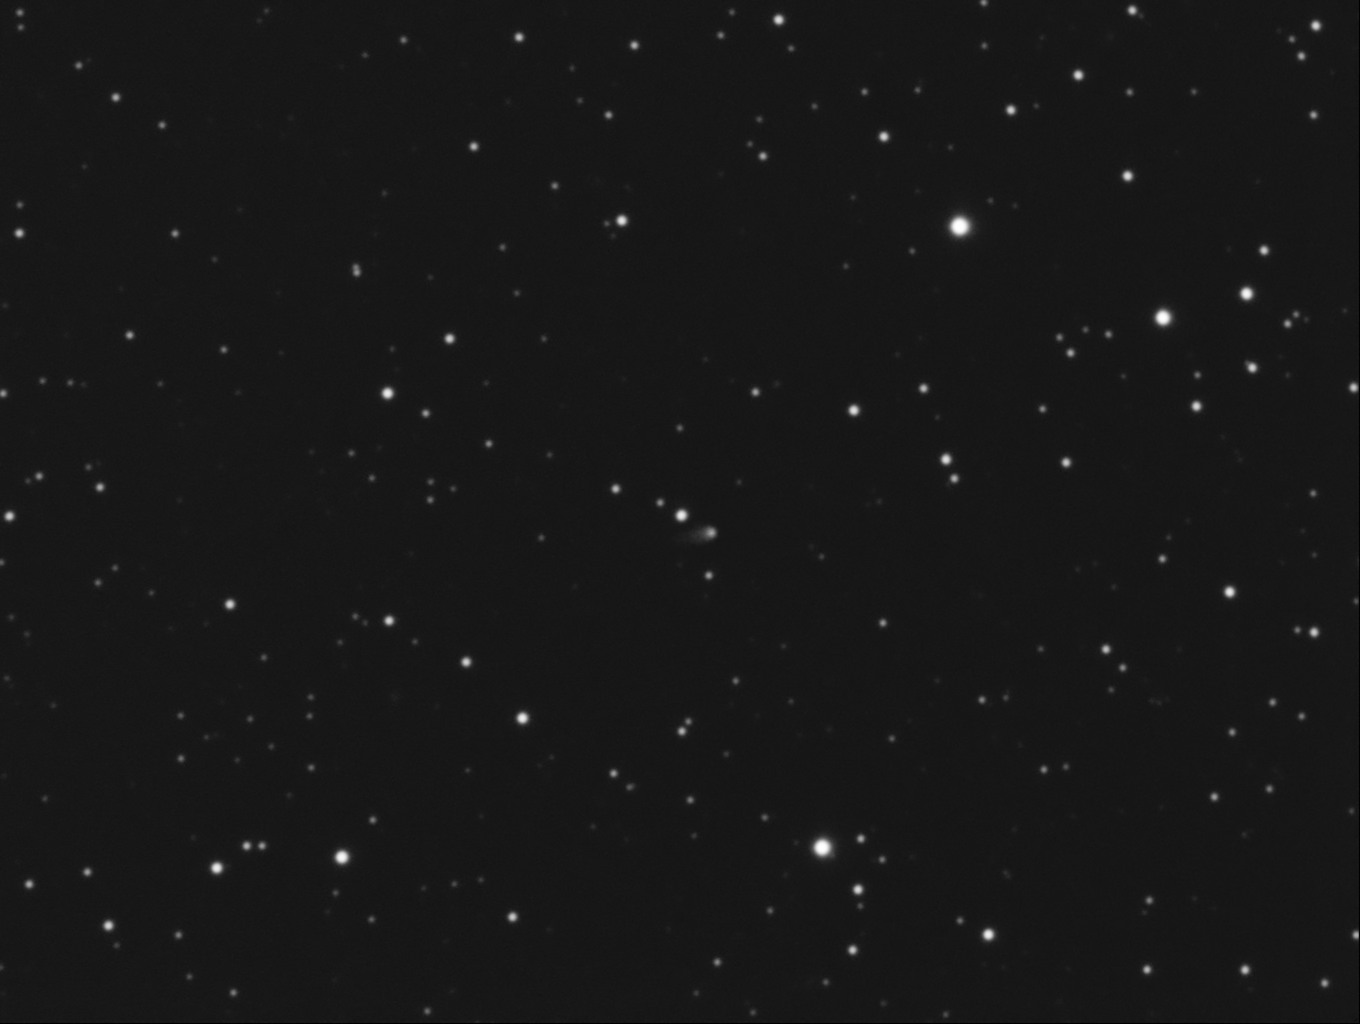 C2012/S1 (ISON)  <br> March 3, 2013